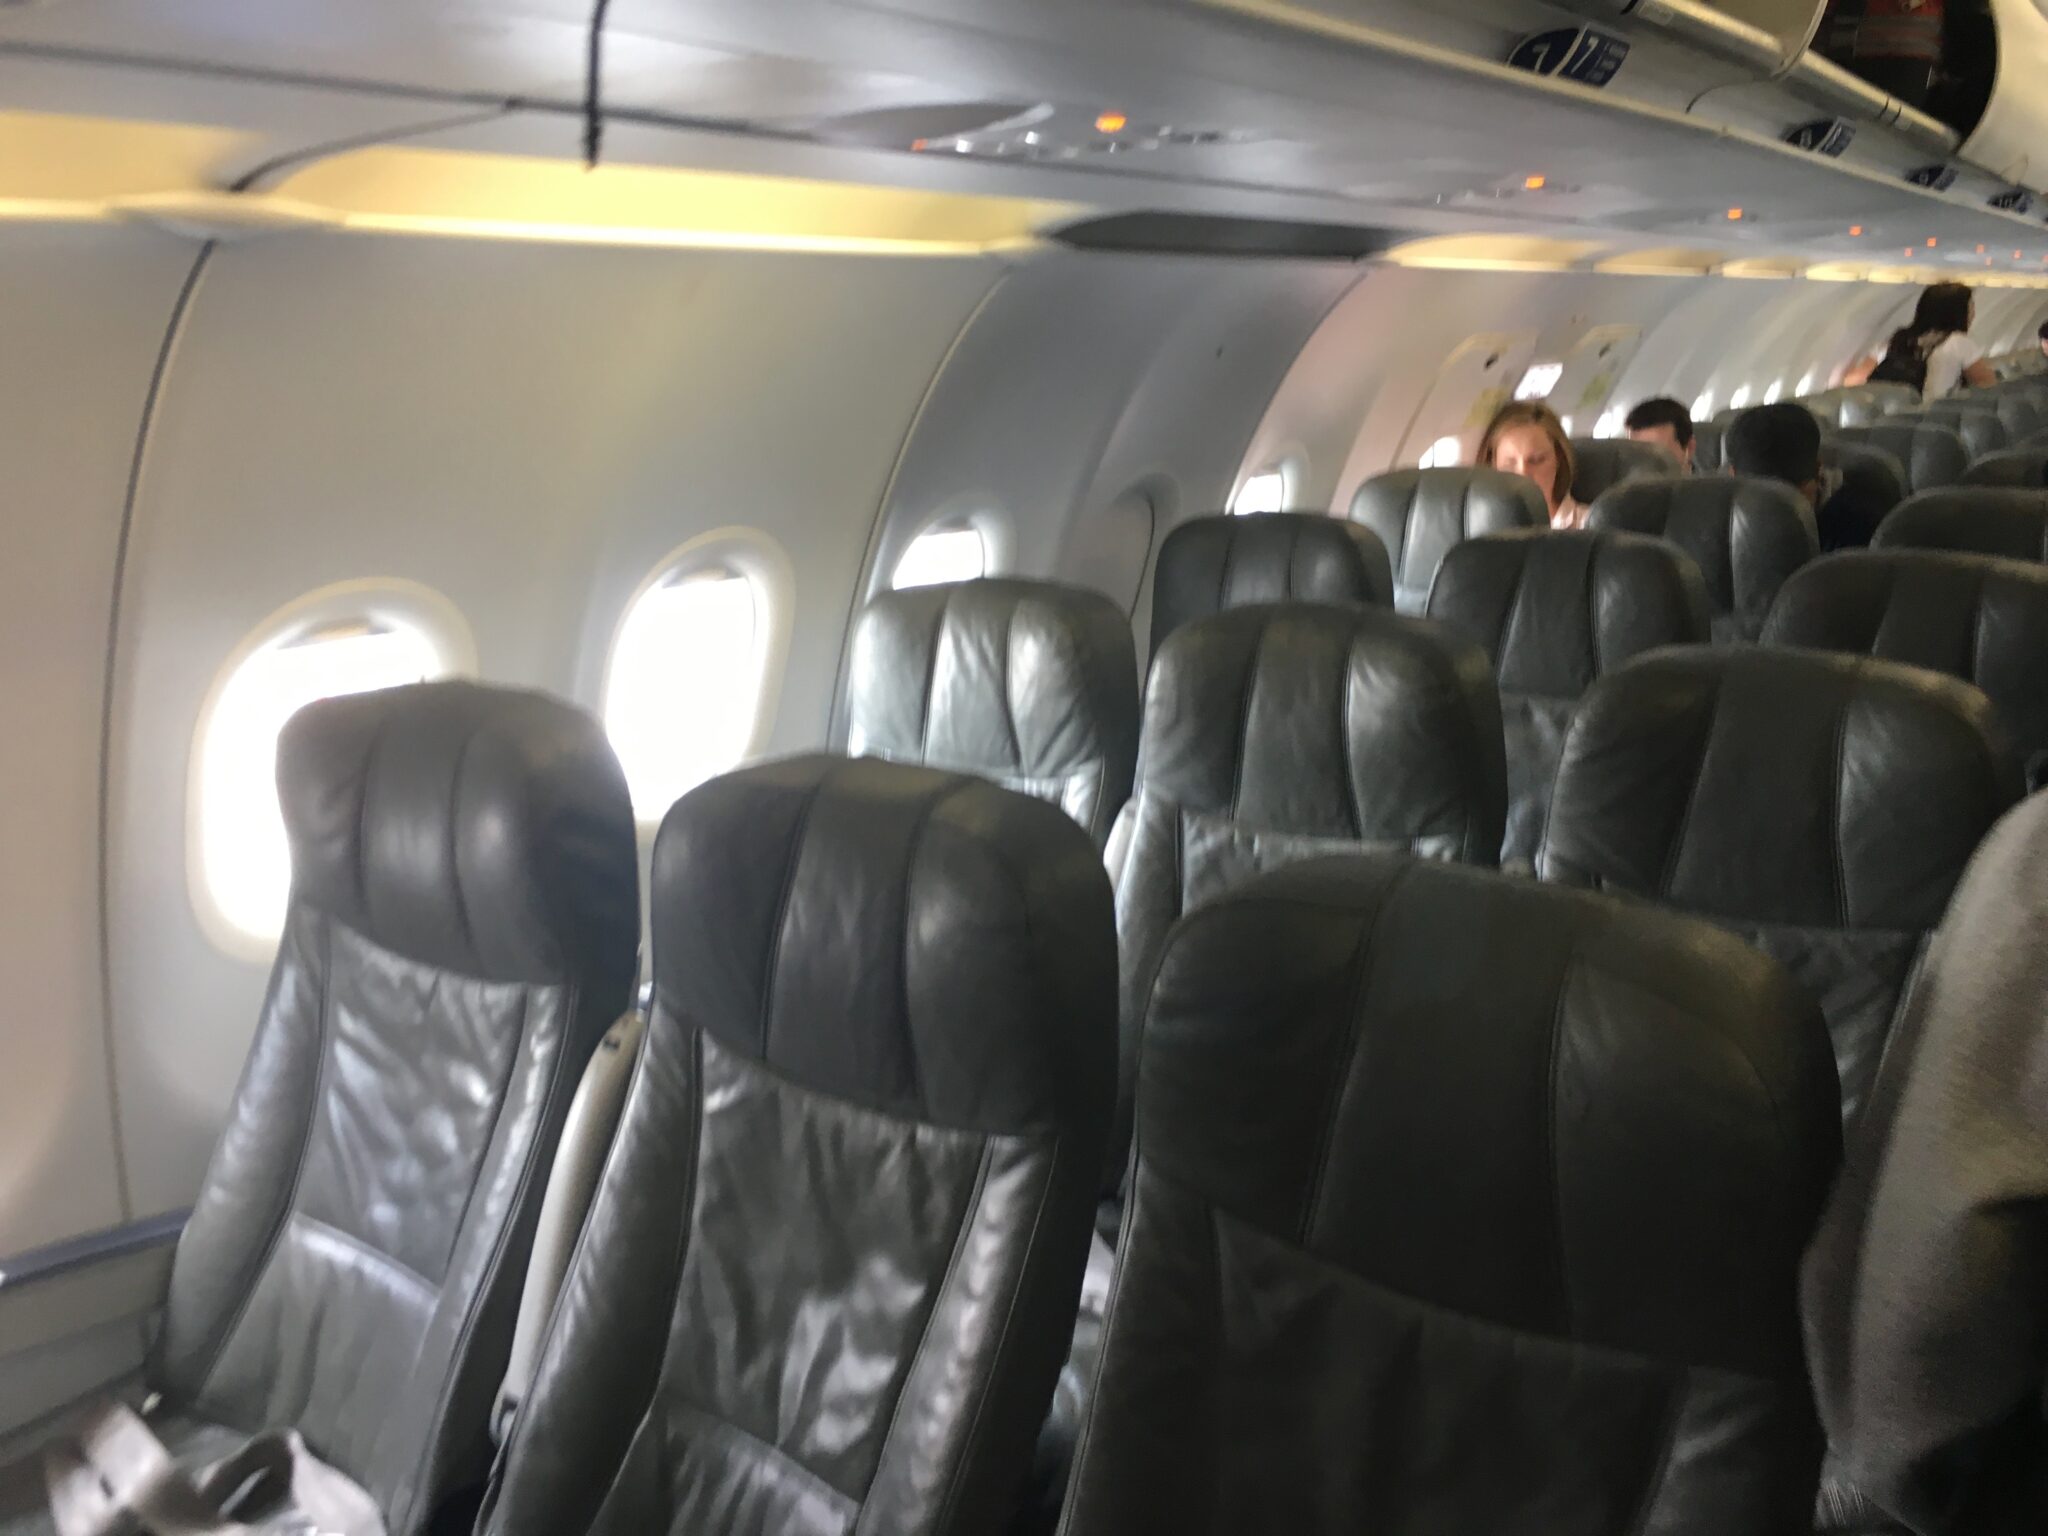 Review: JetBlue A320 Economy Class (JFK-MSY) - Young Travelers of Hong Kong